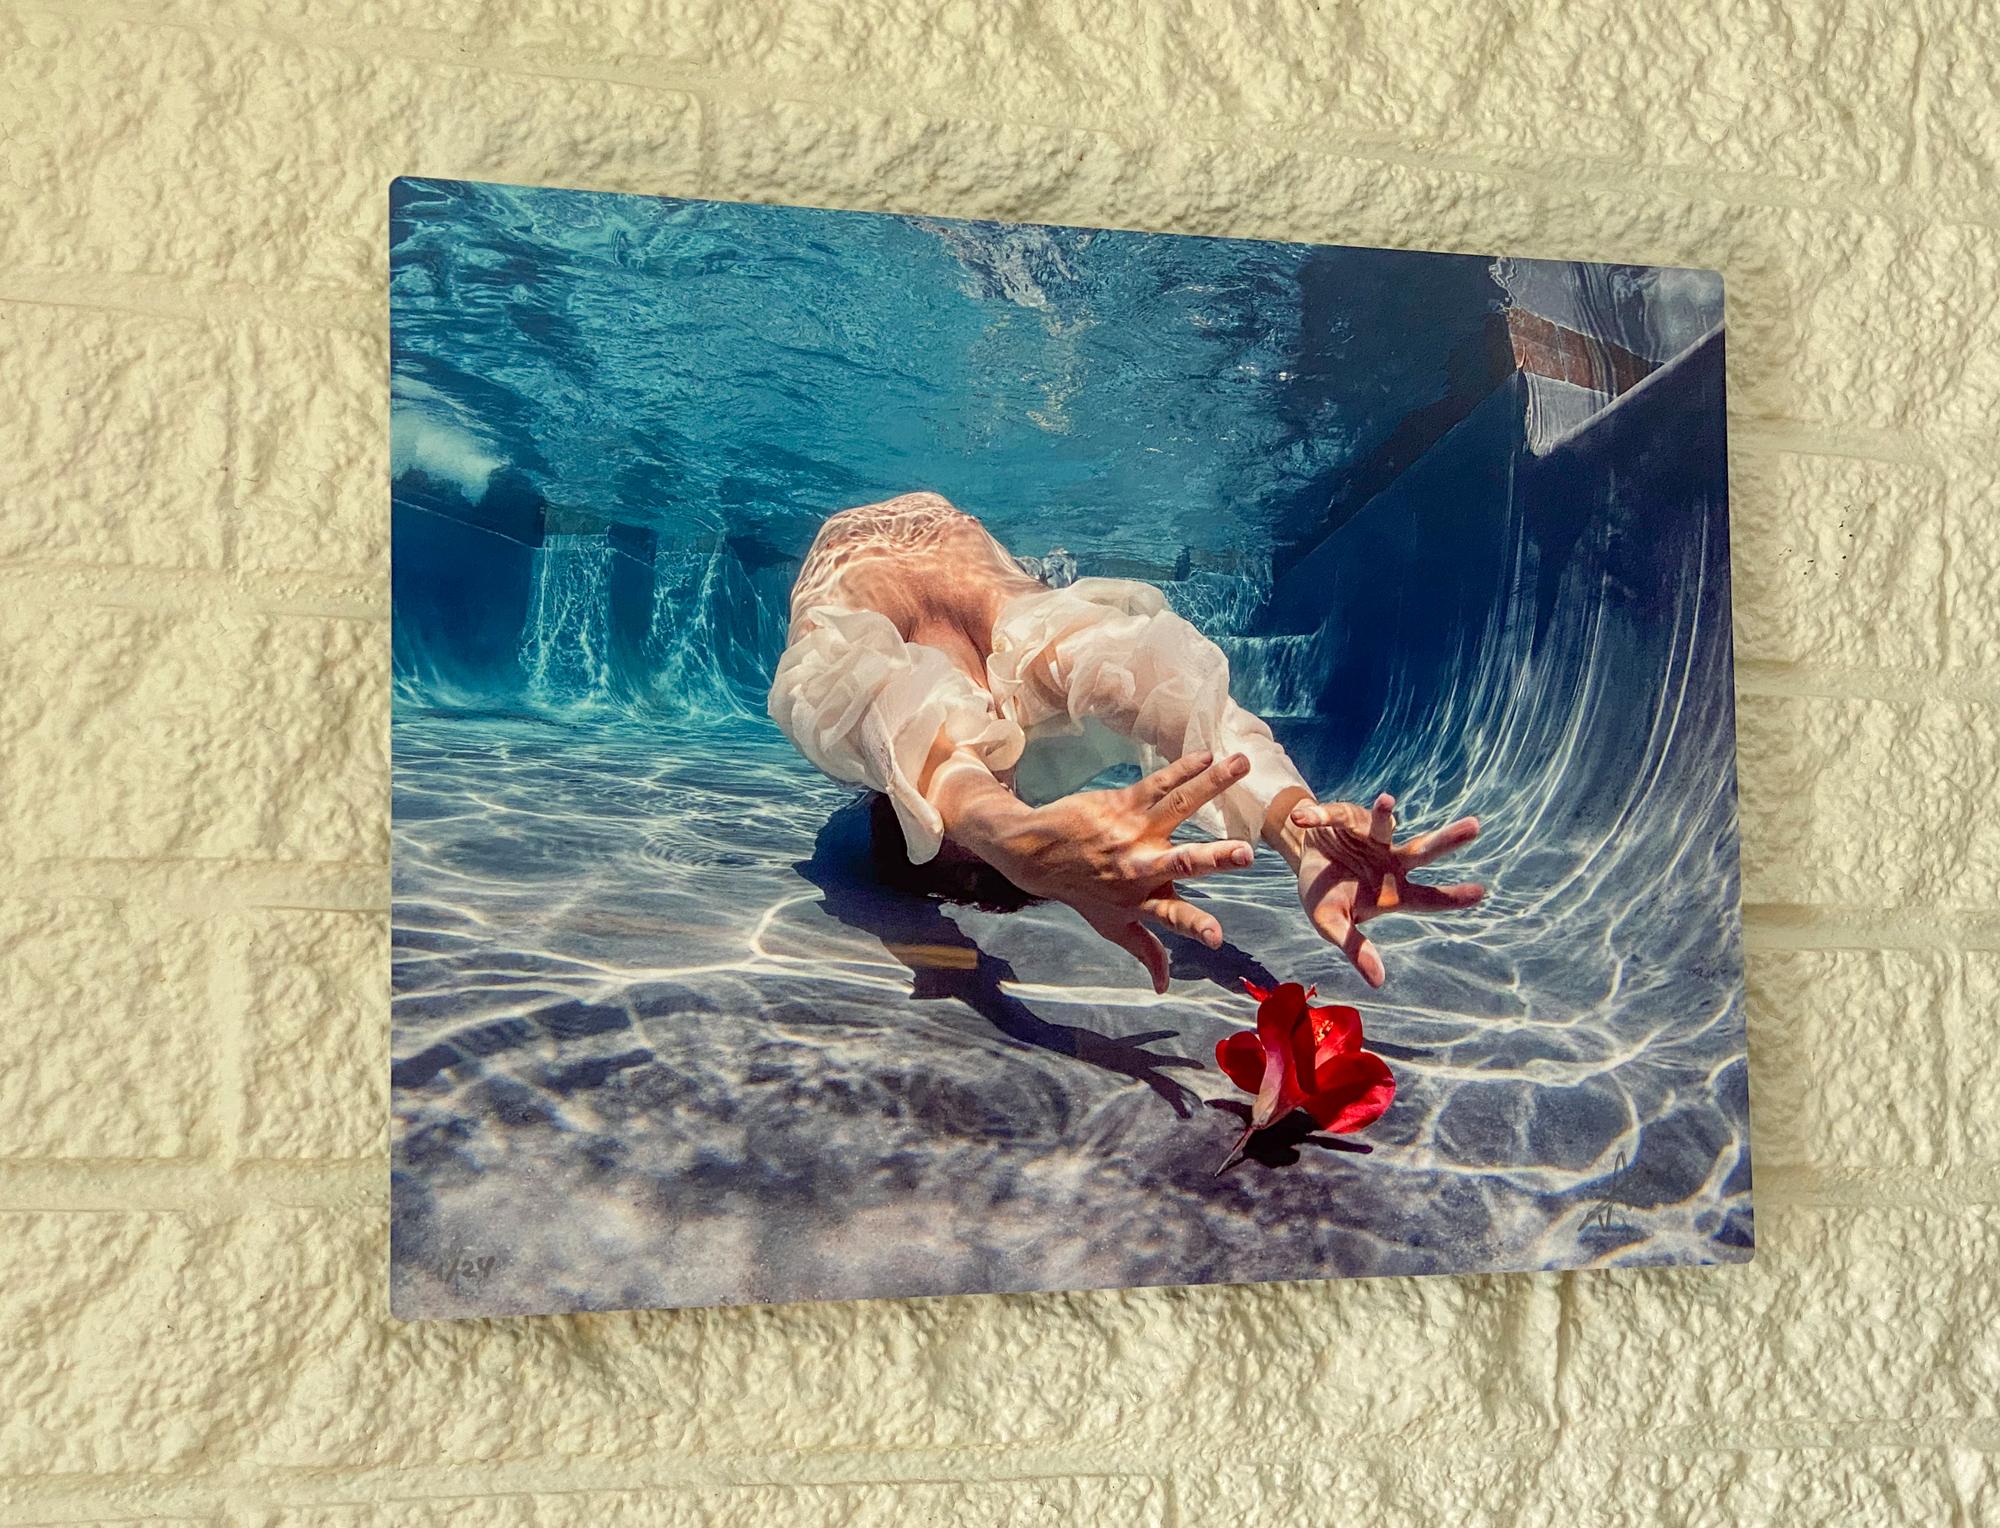 Cold Song II - underwater photograph - print on aluminum 17 x 24 - Photograph by Alex Sher